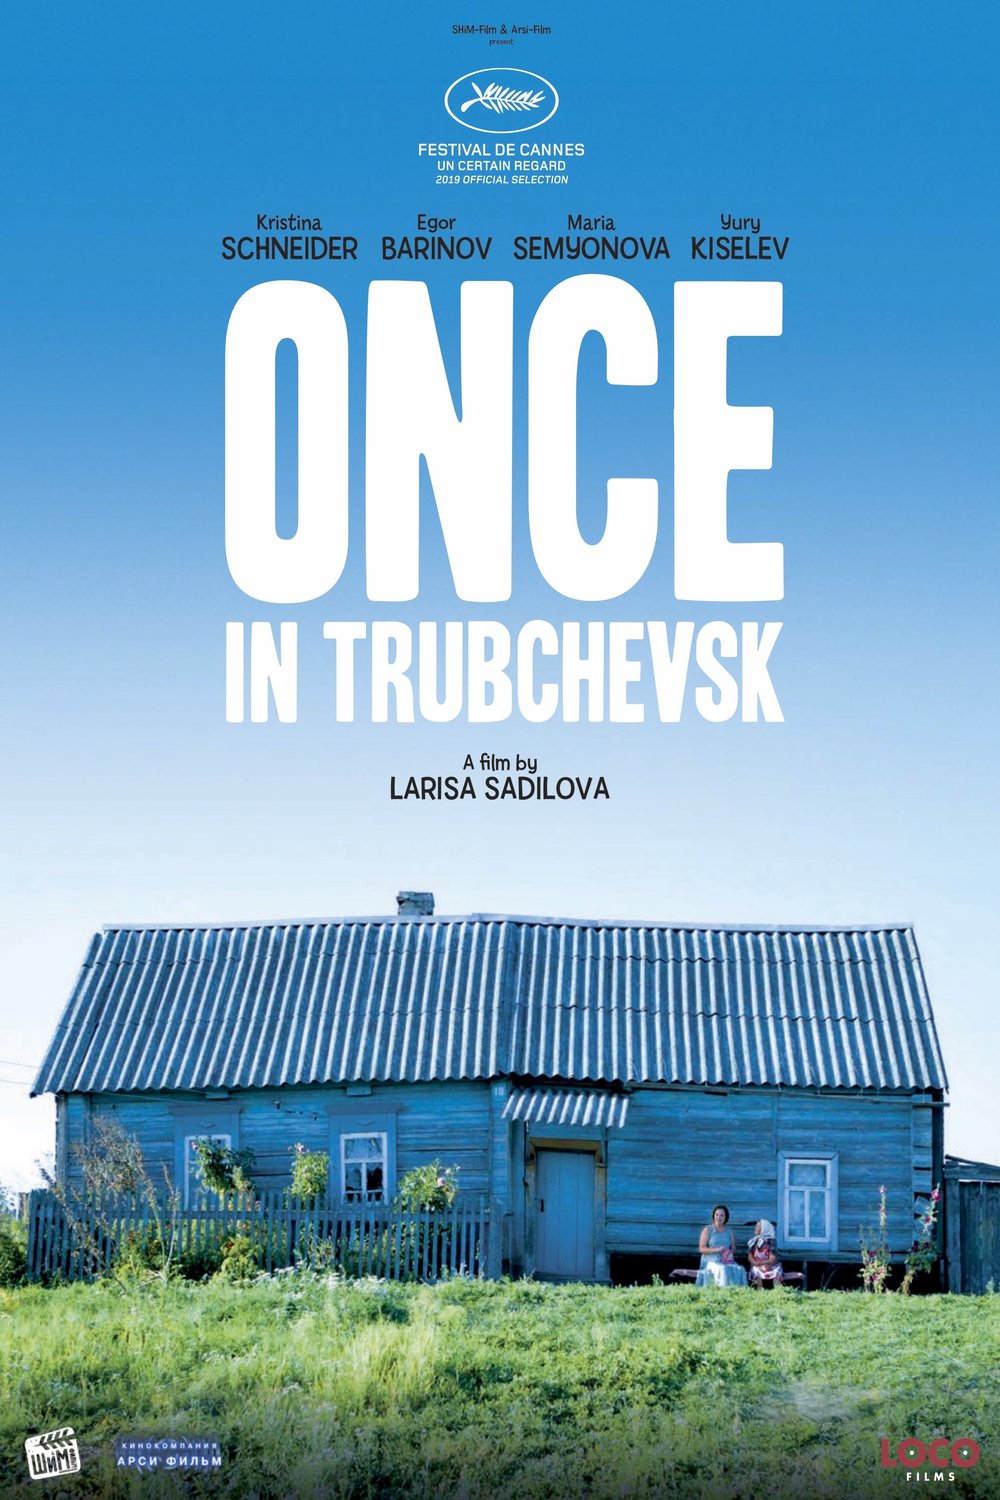 Poster of the movie Once in Trubchevsk